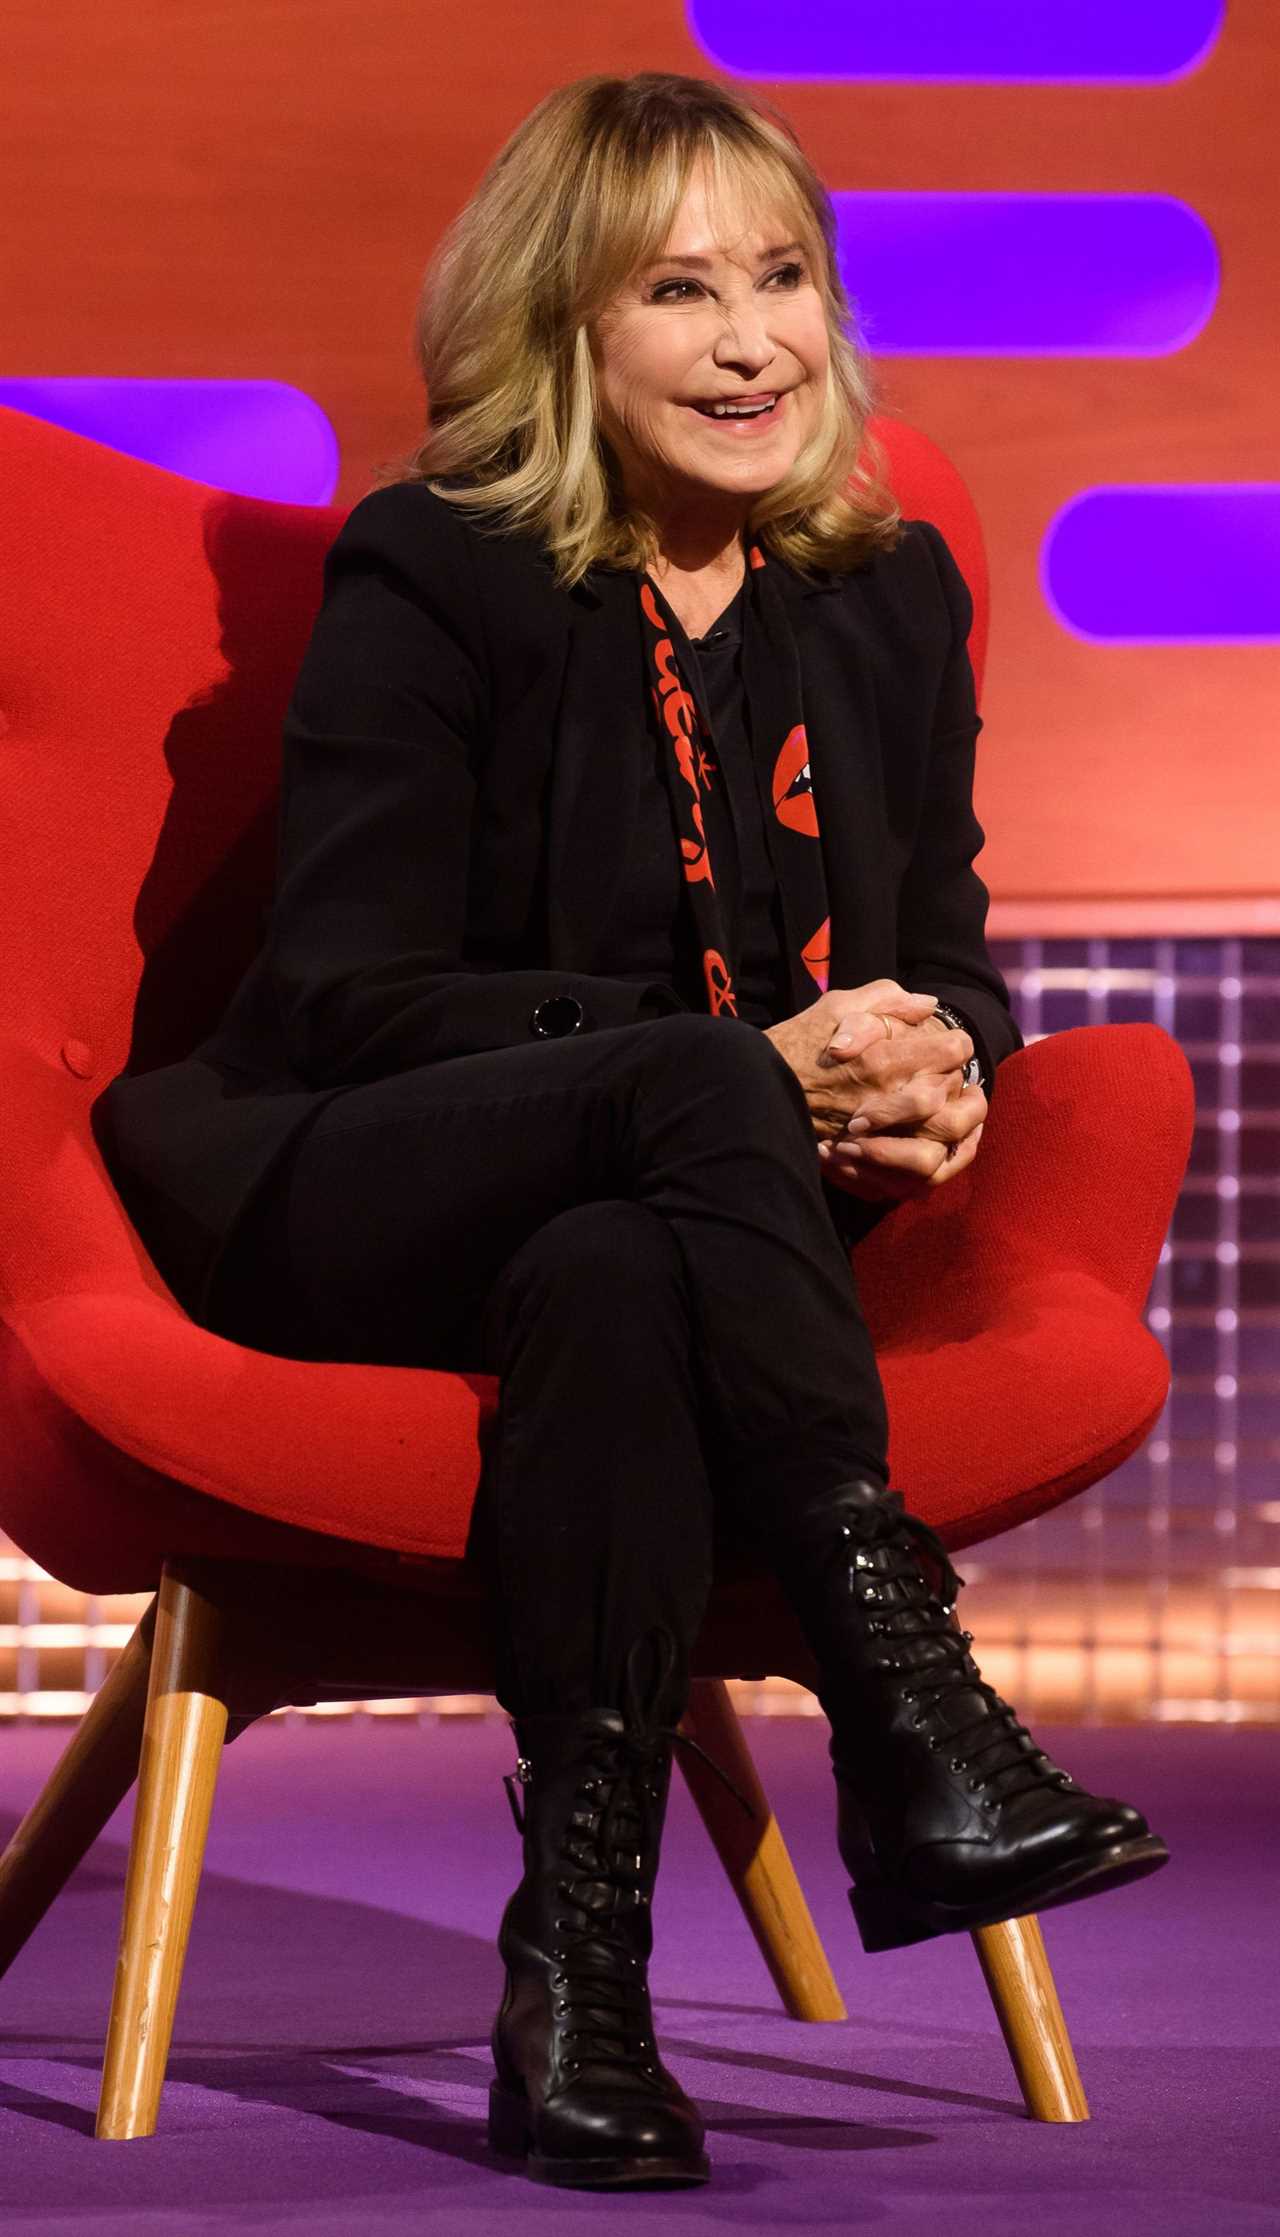 The One Show viewers left stunned after discovering actress Felicity Kendal’s real age